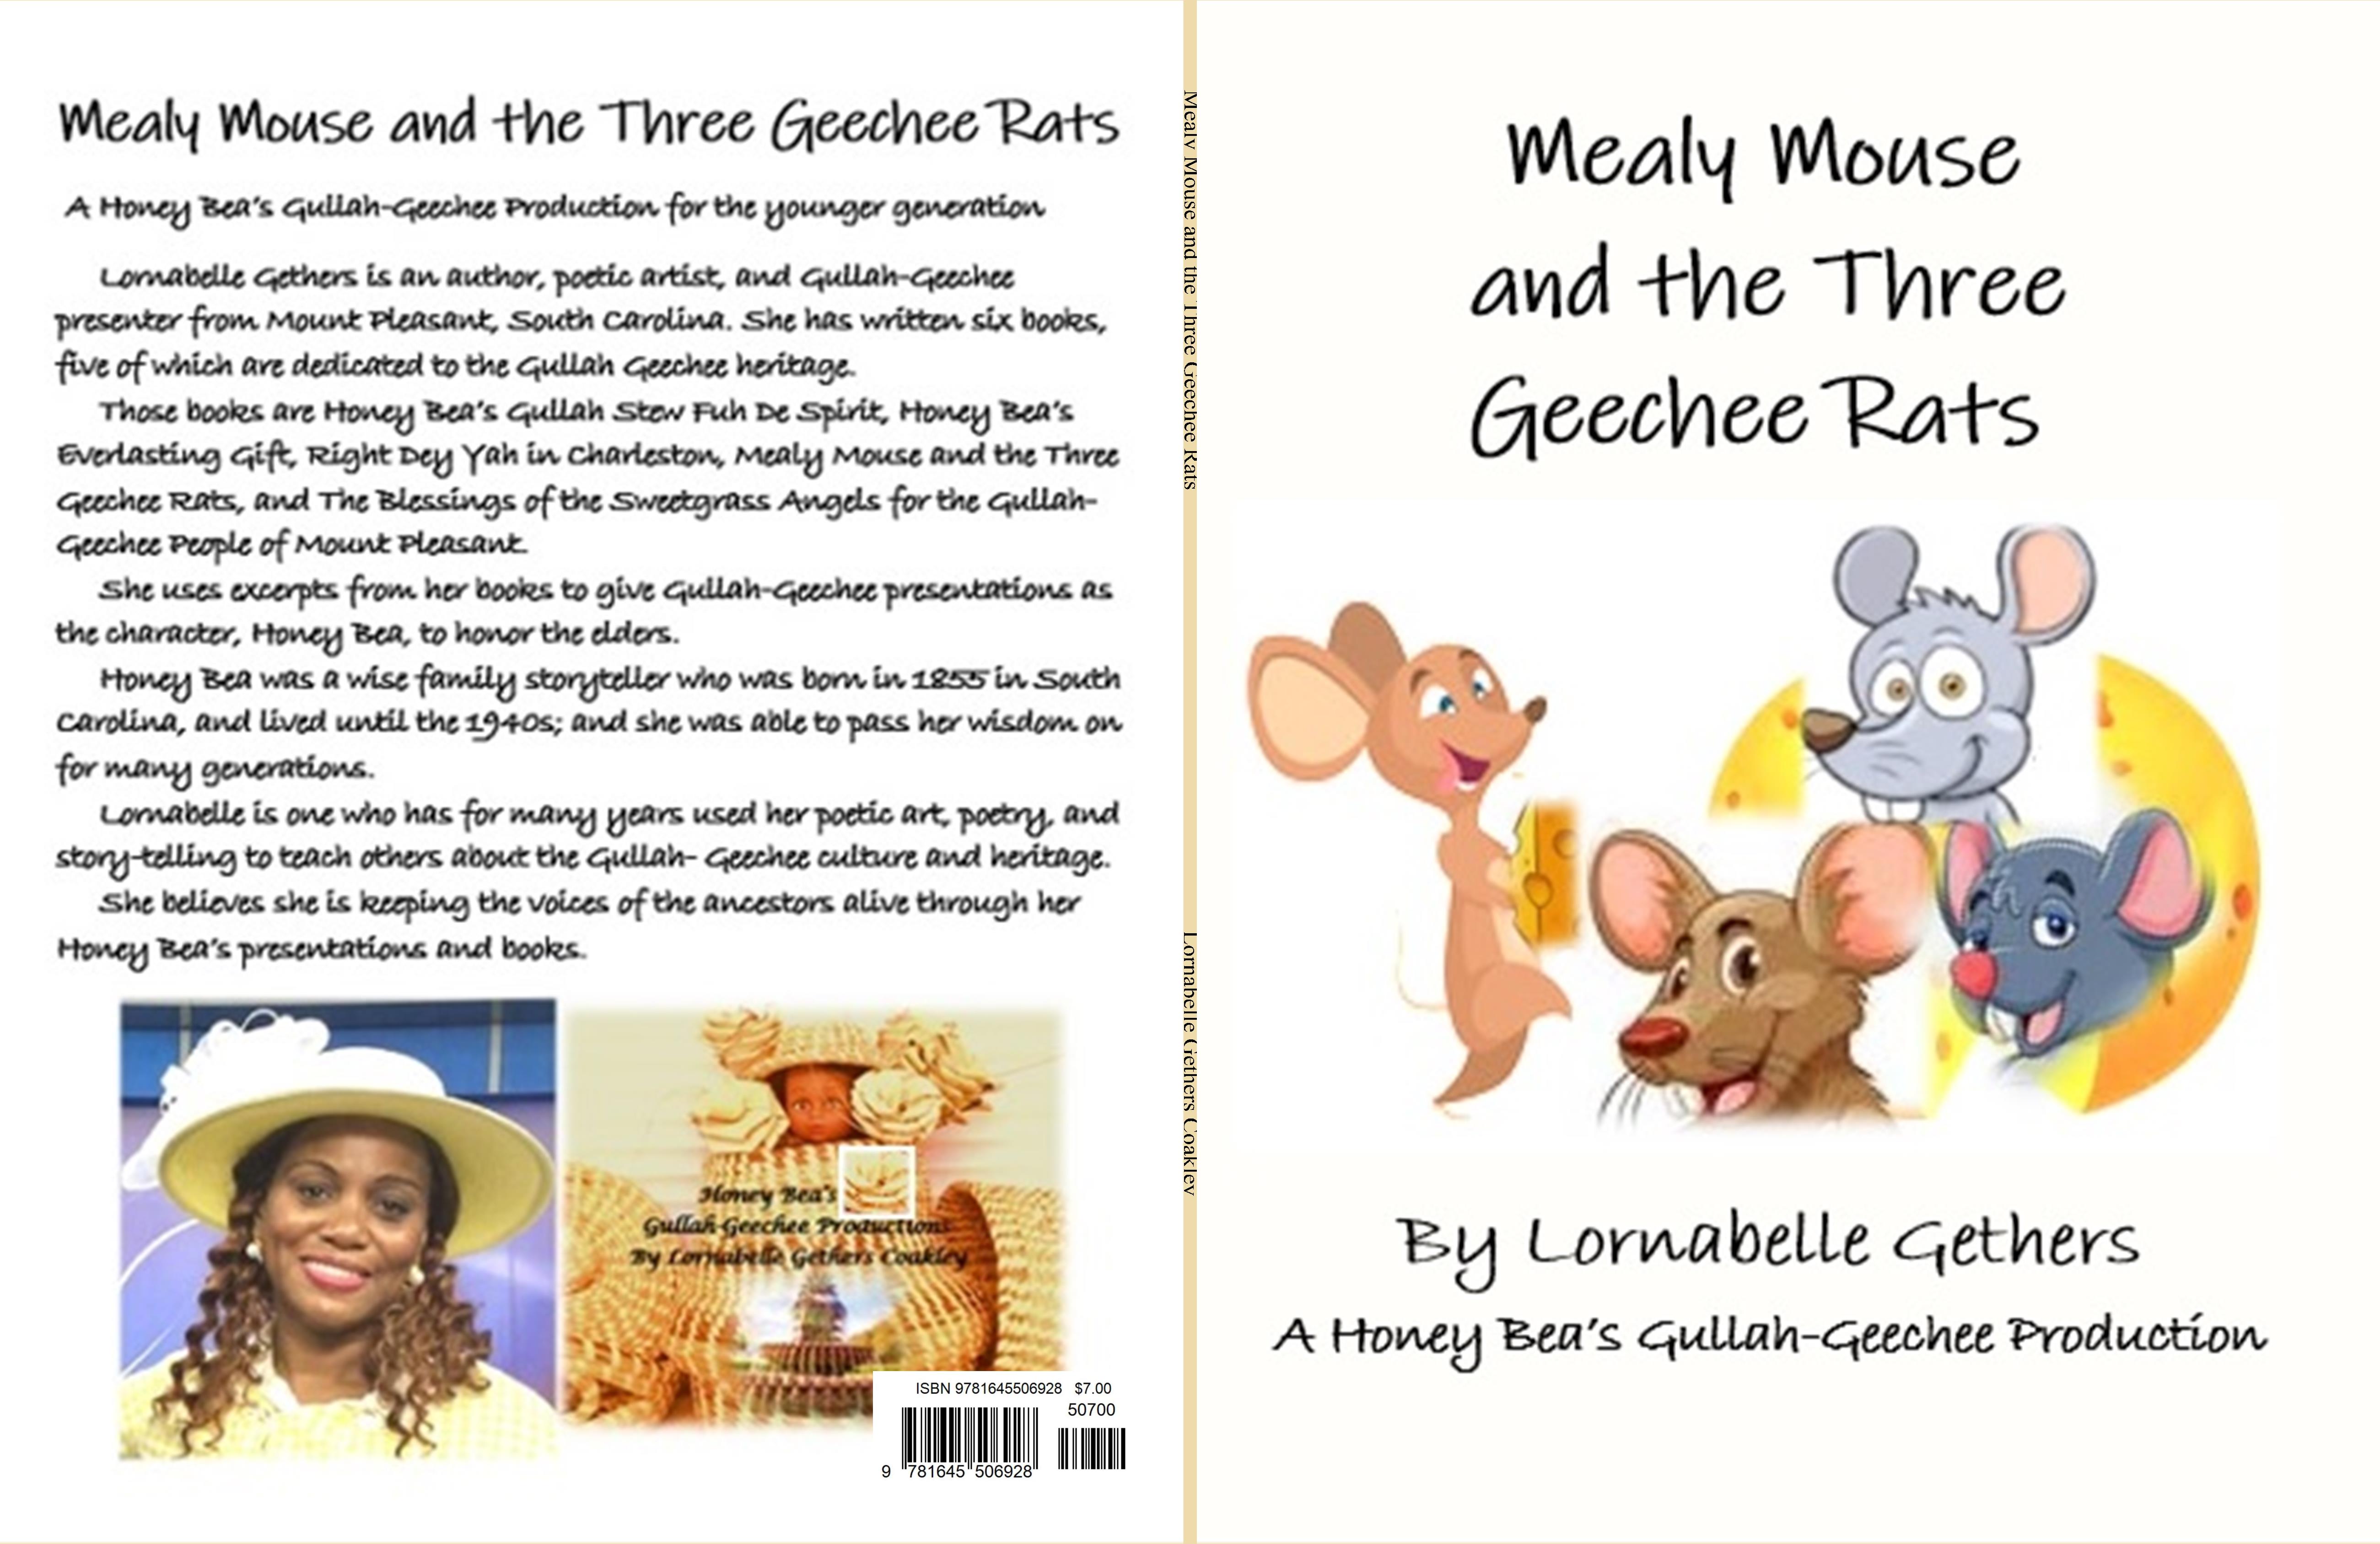 Mealy Mouse and the Three Geechee Rats cover image